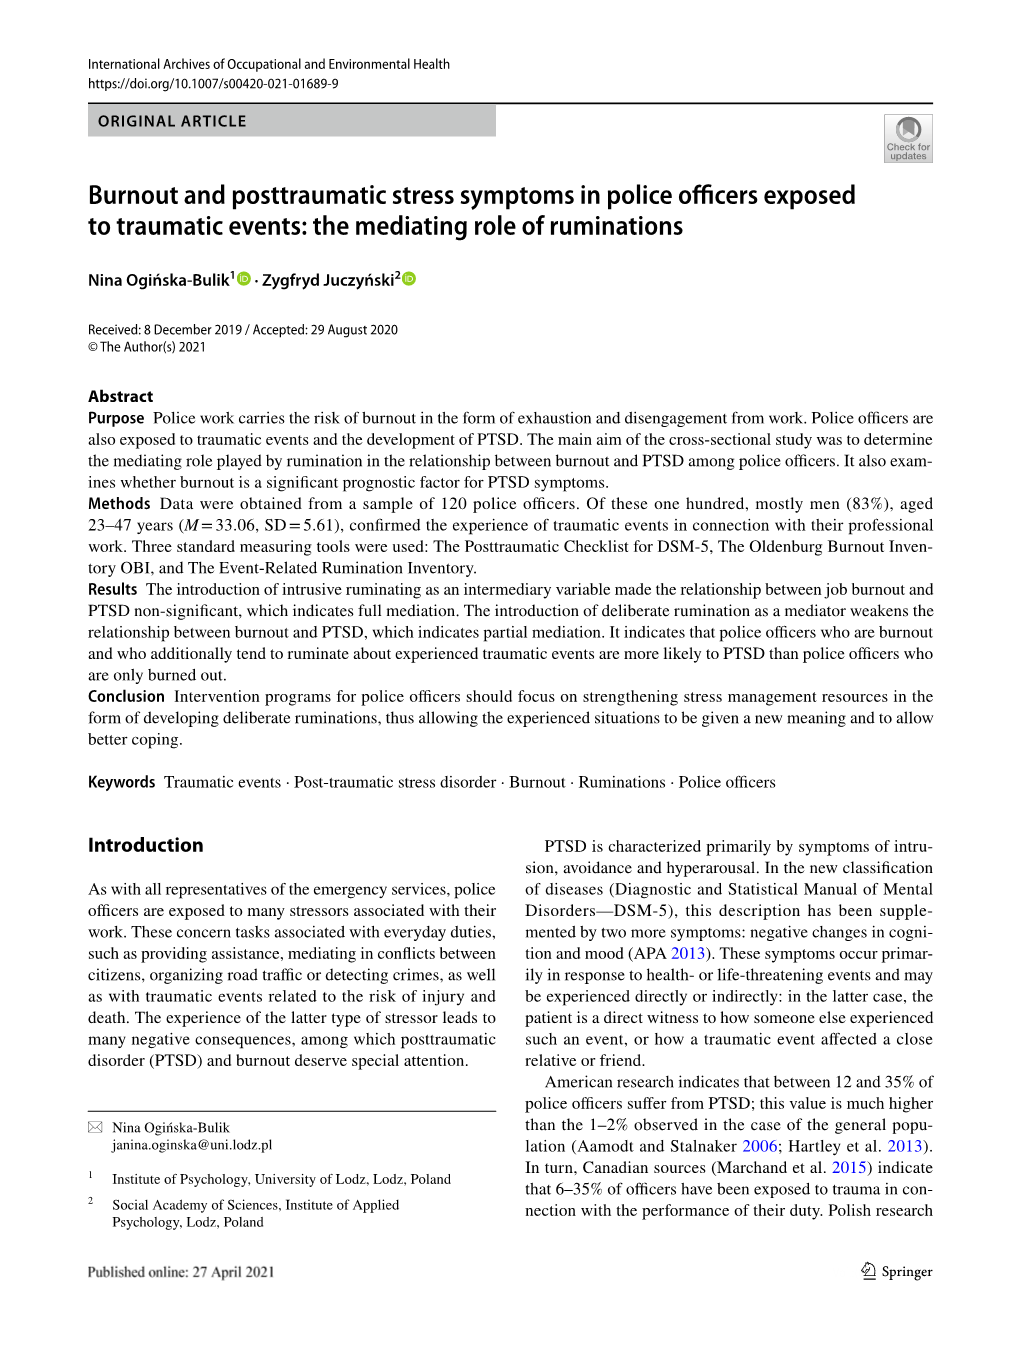 Burnout and Posttraumatic Stress Symptoms in Police Officers